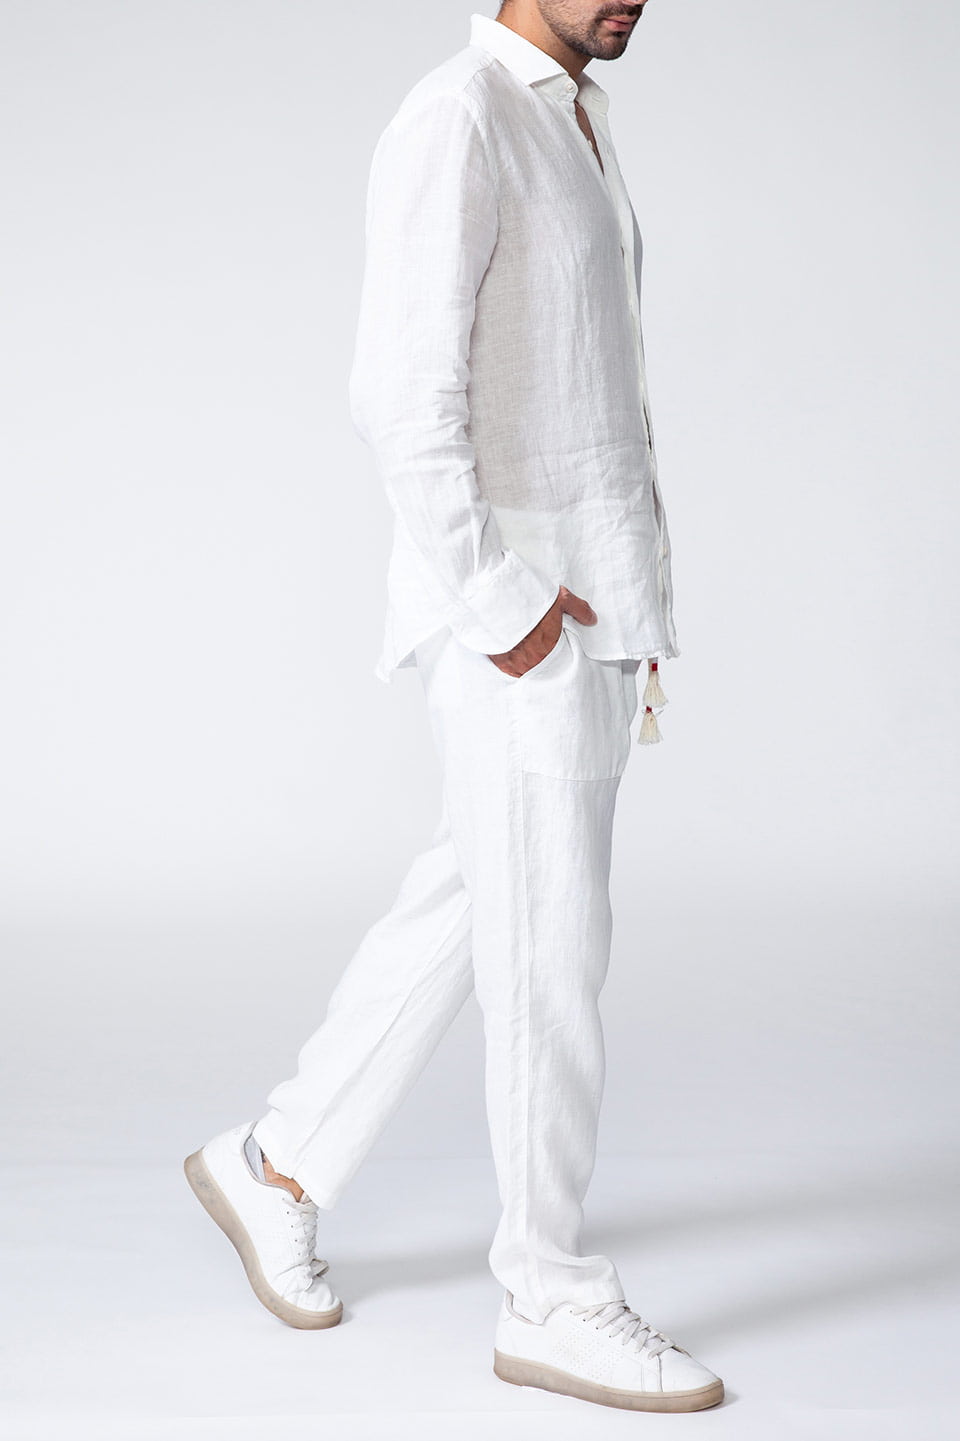 Man linen trousers in white color with back pockets from Italian brand MC2 Saint Barth, product side details